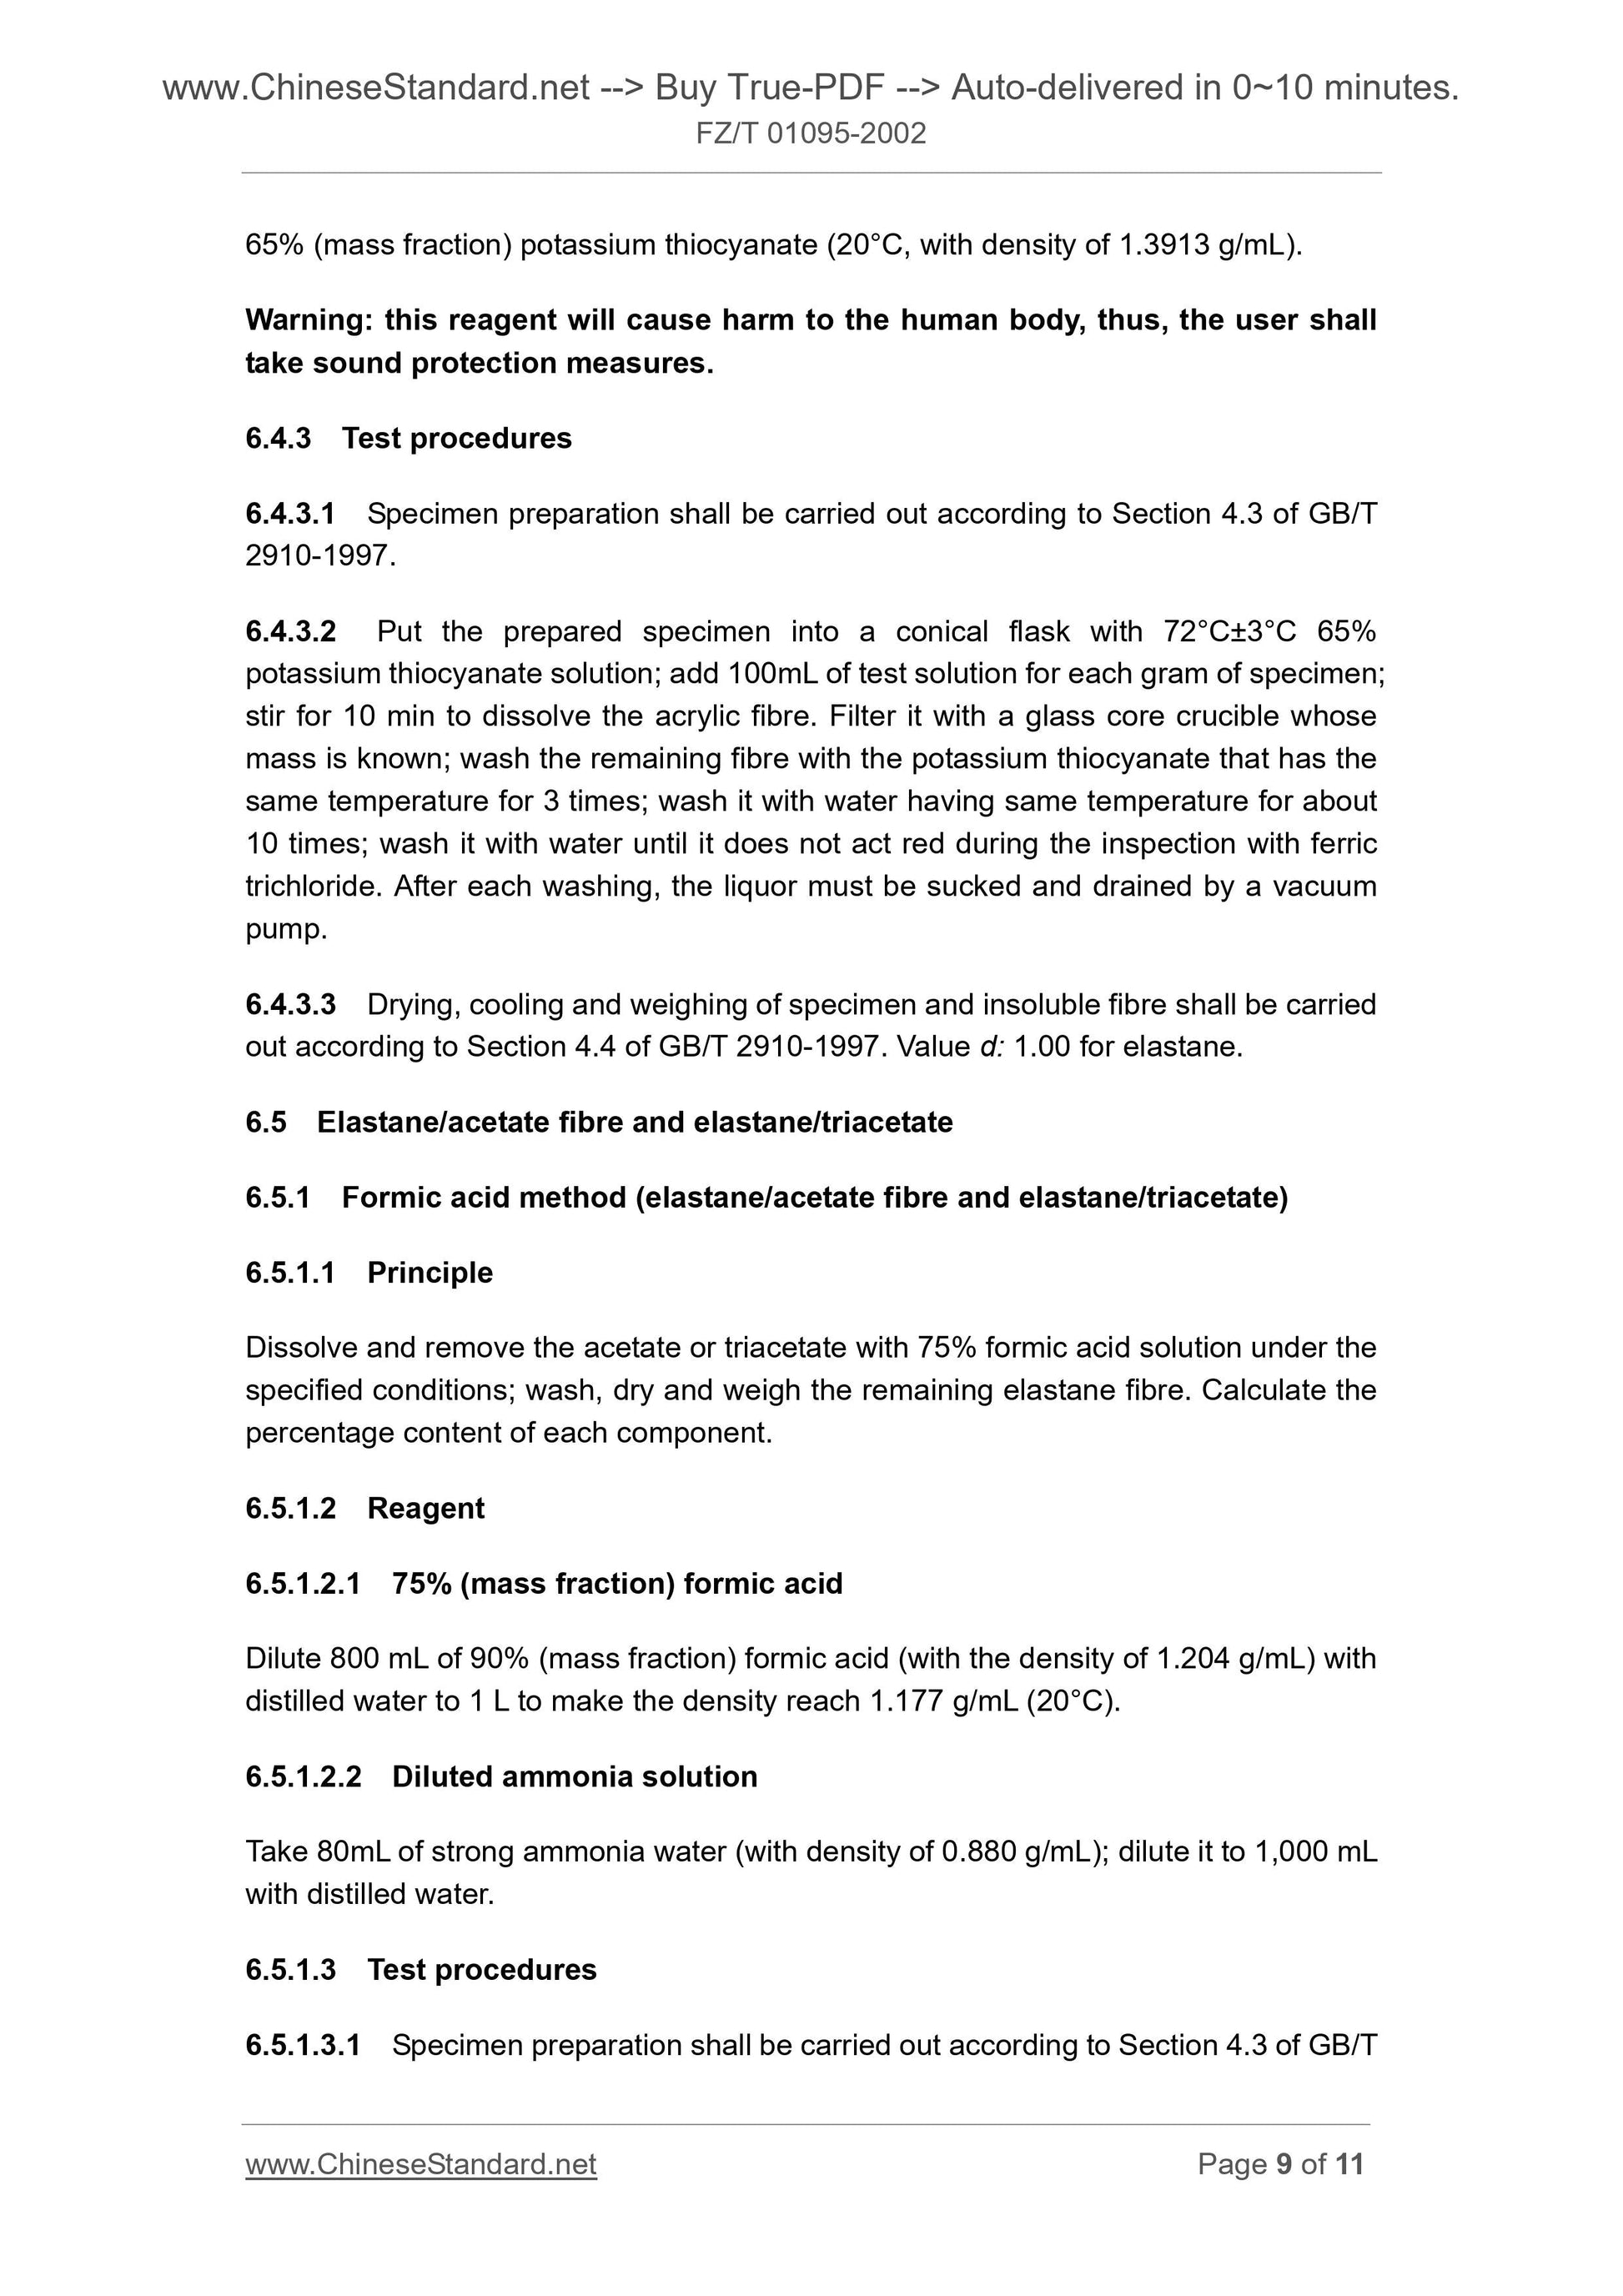 FZ/T 01095-2002 Page 6